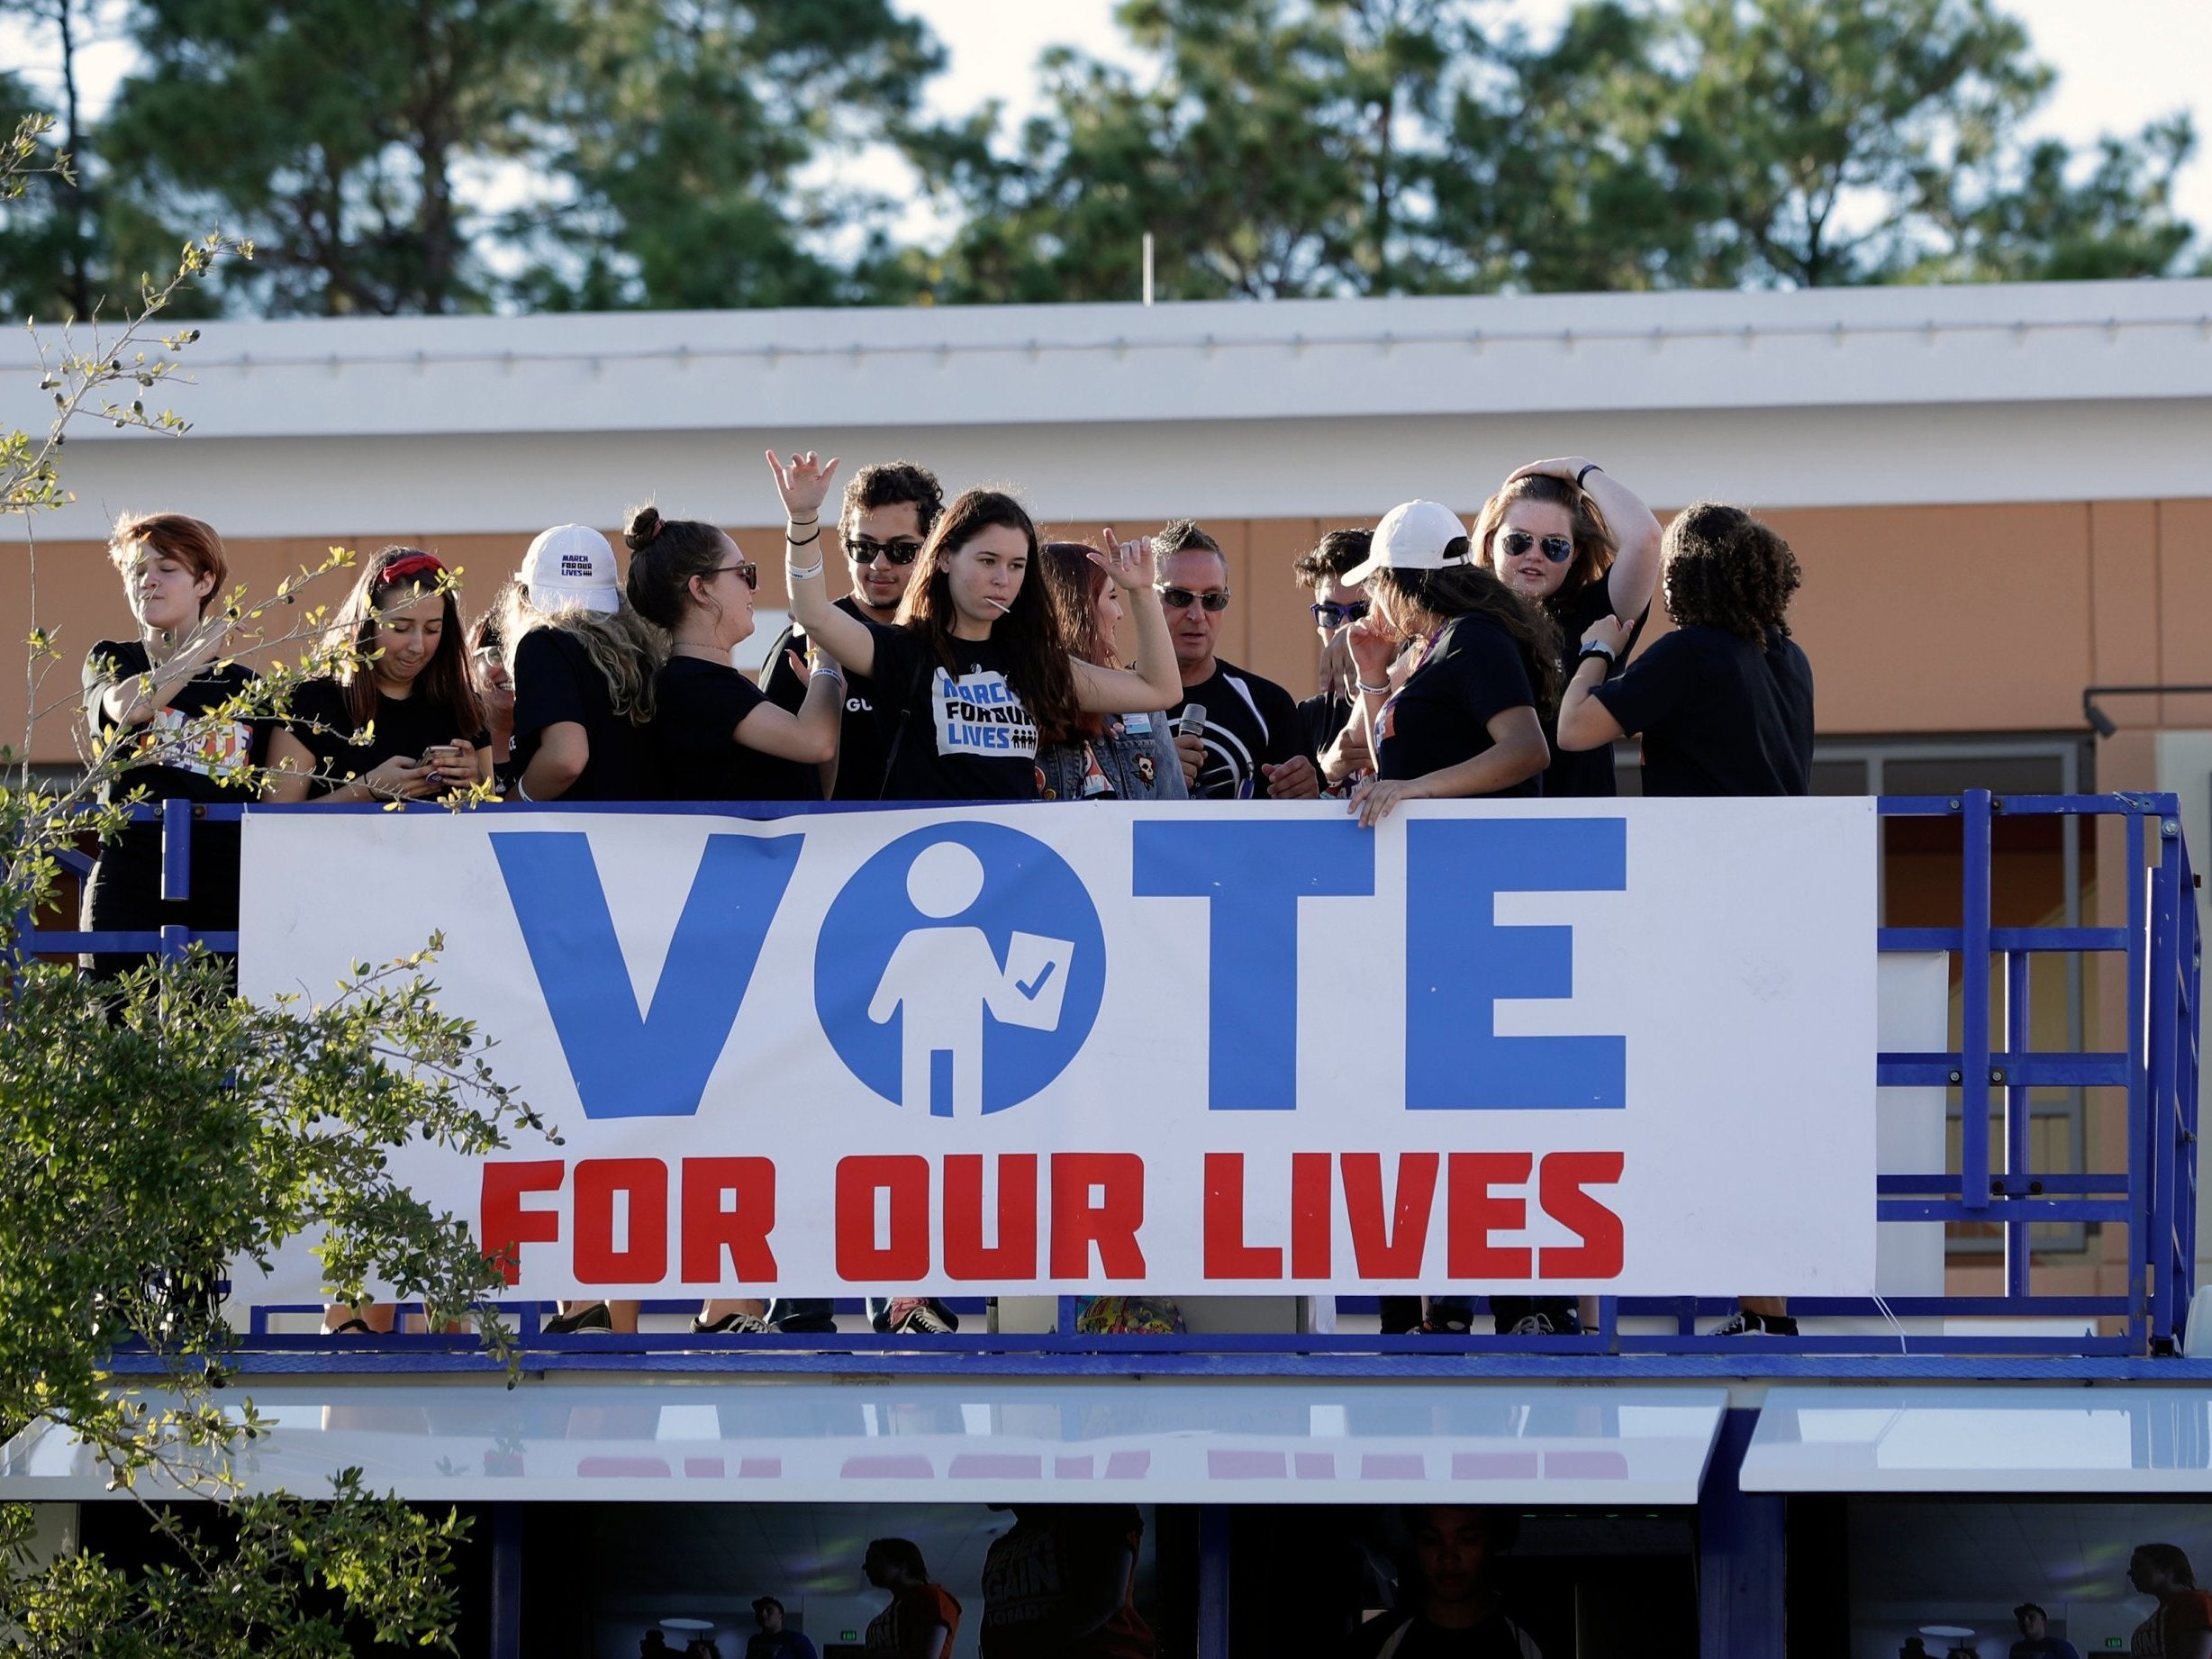 Students on top of a bus during a Vote for Our Lives rally at the University of Central Florida in Orlando